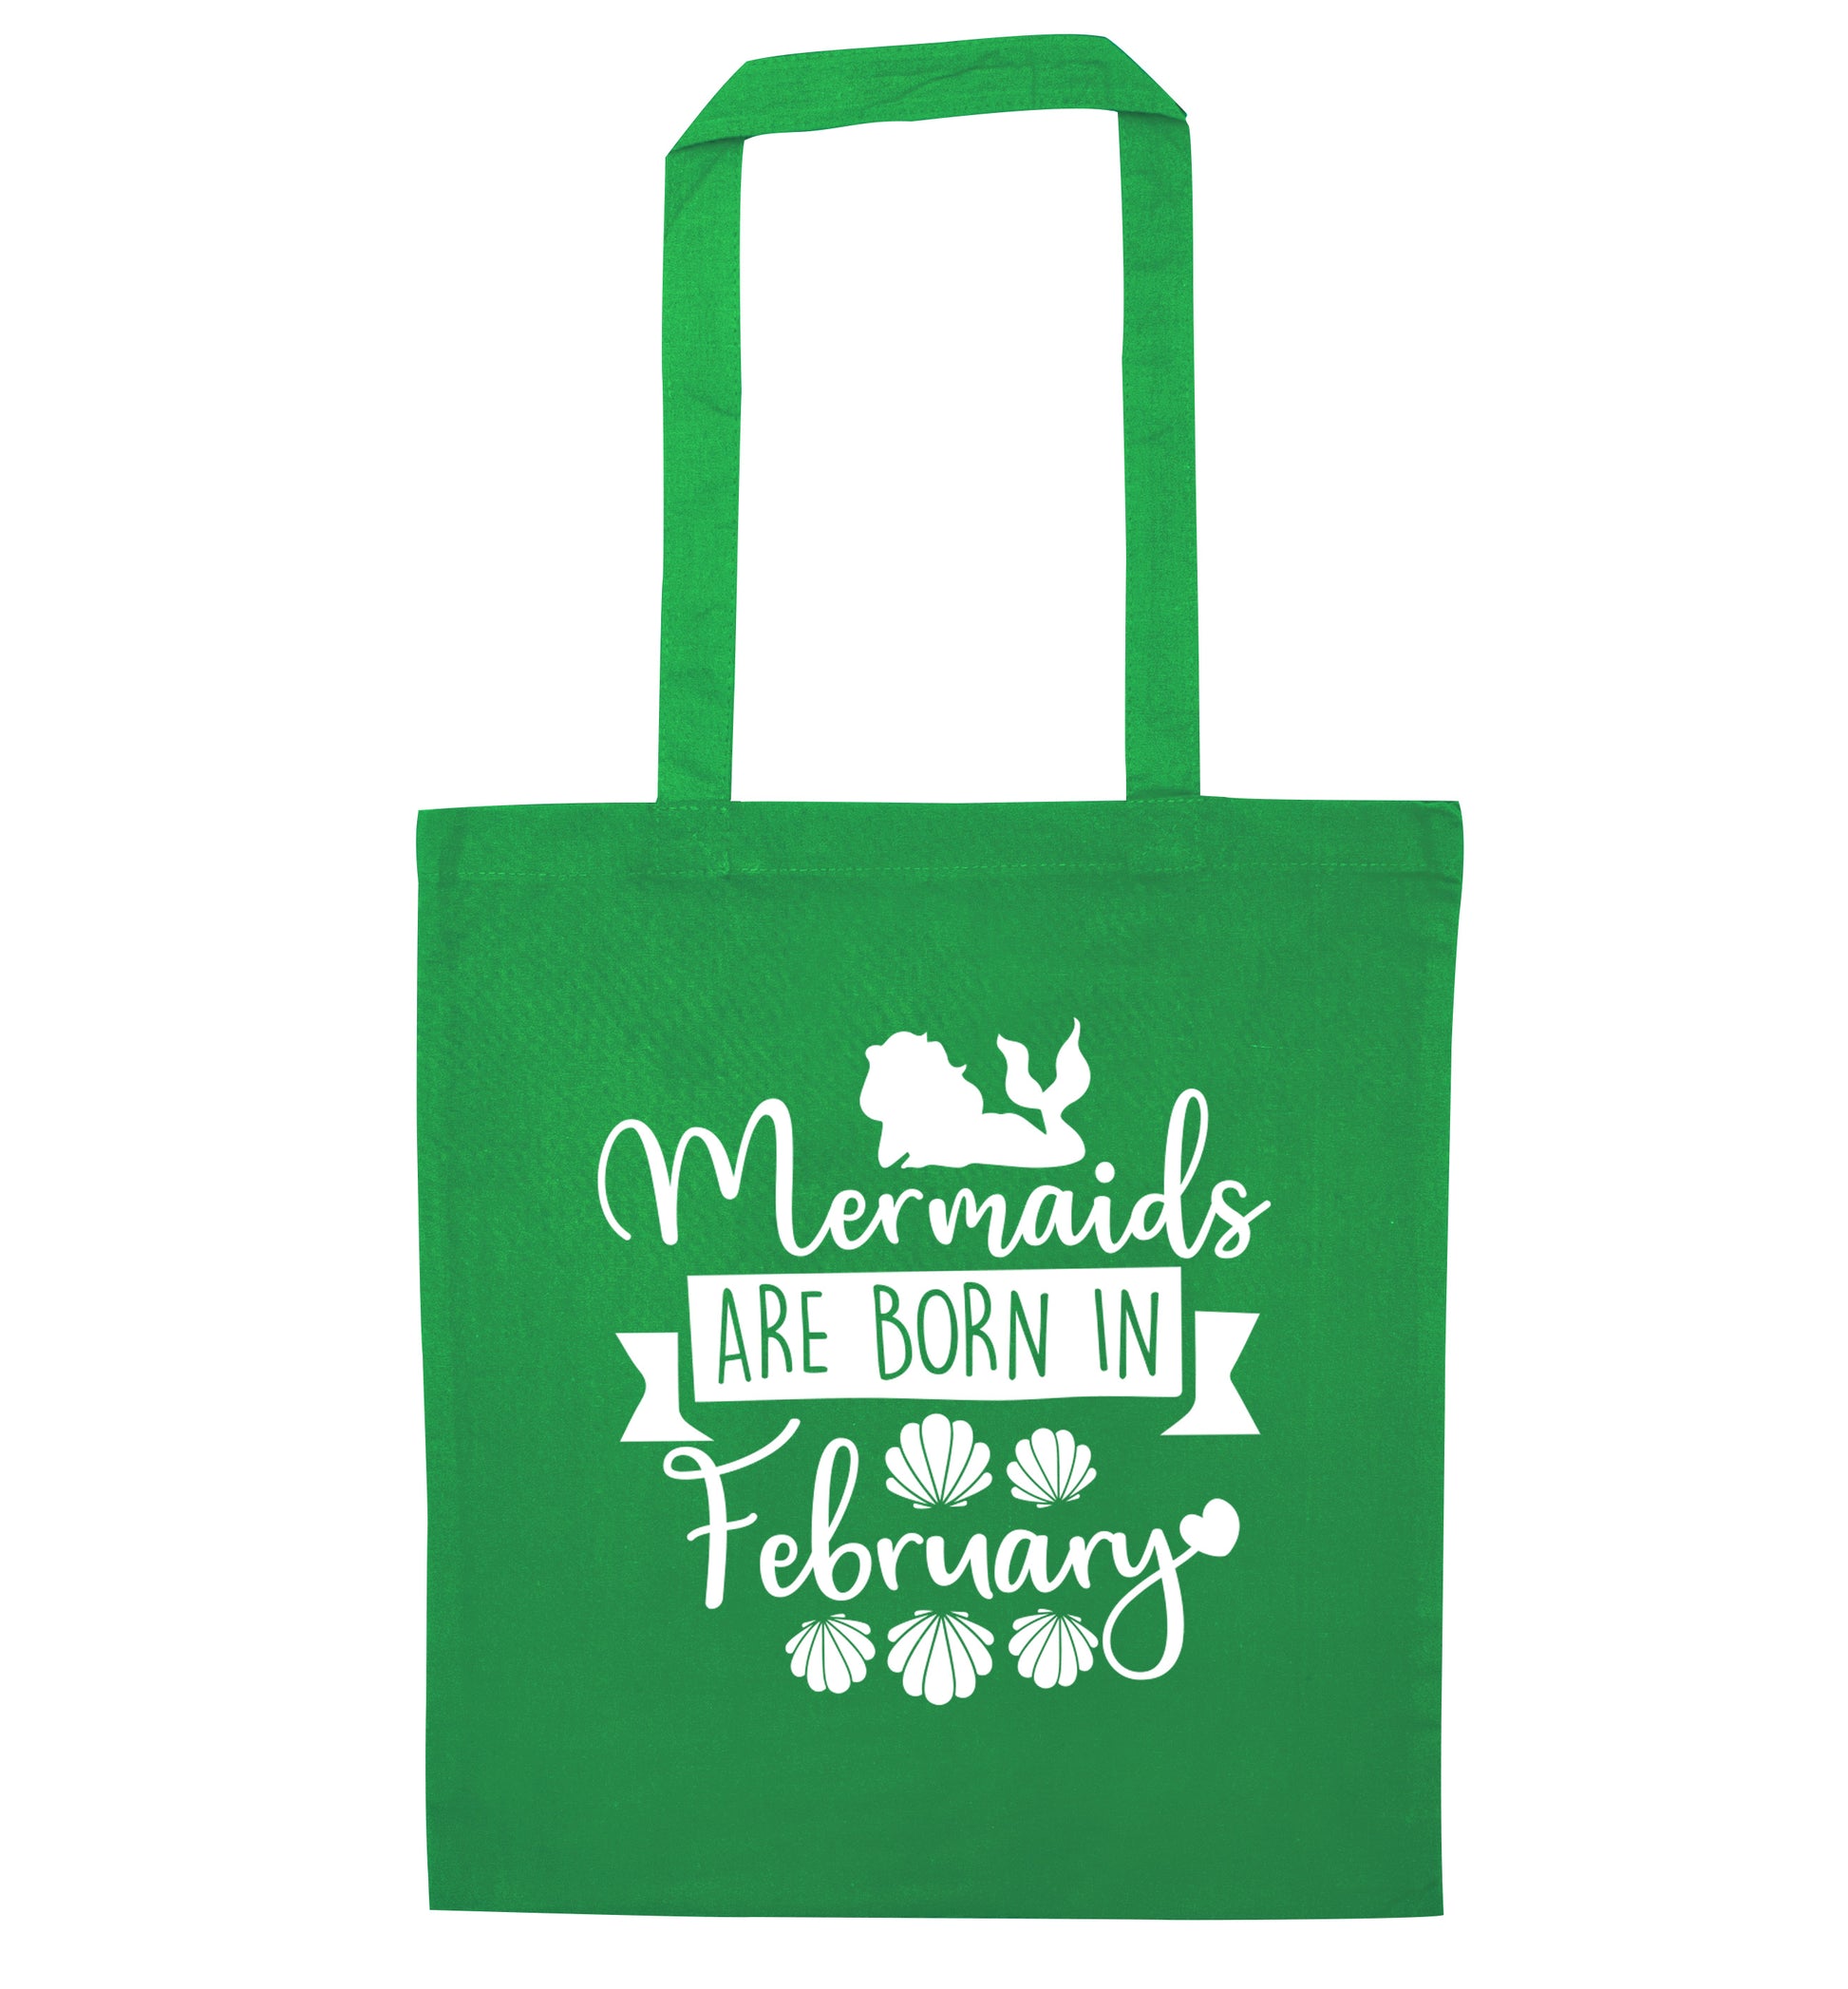 Mermaids are born in February green tote bag